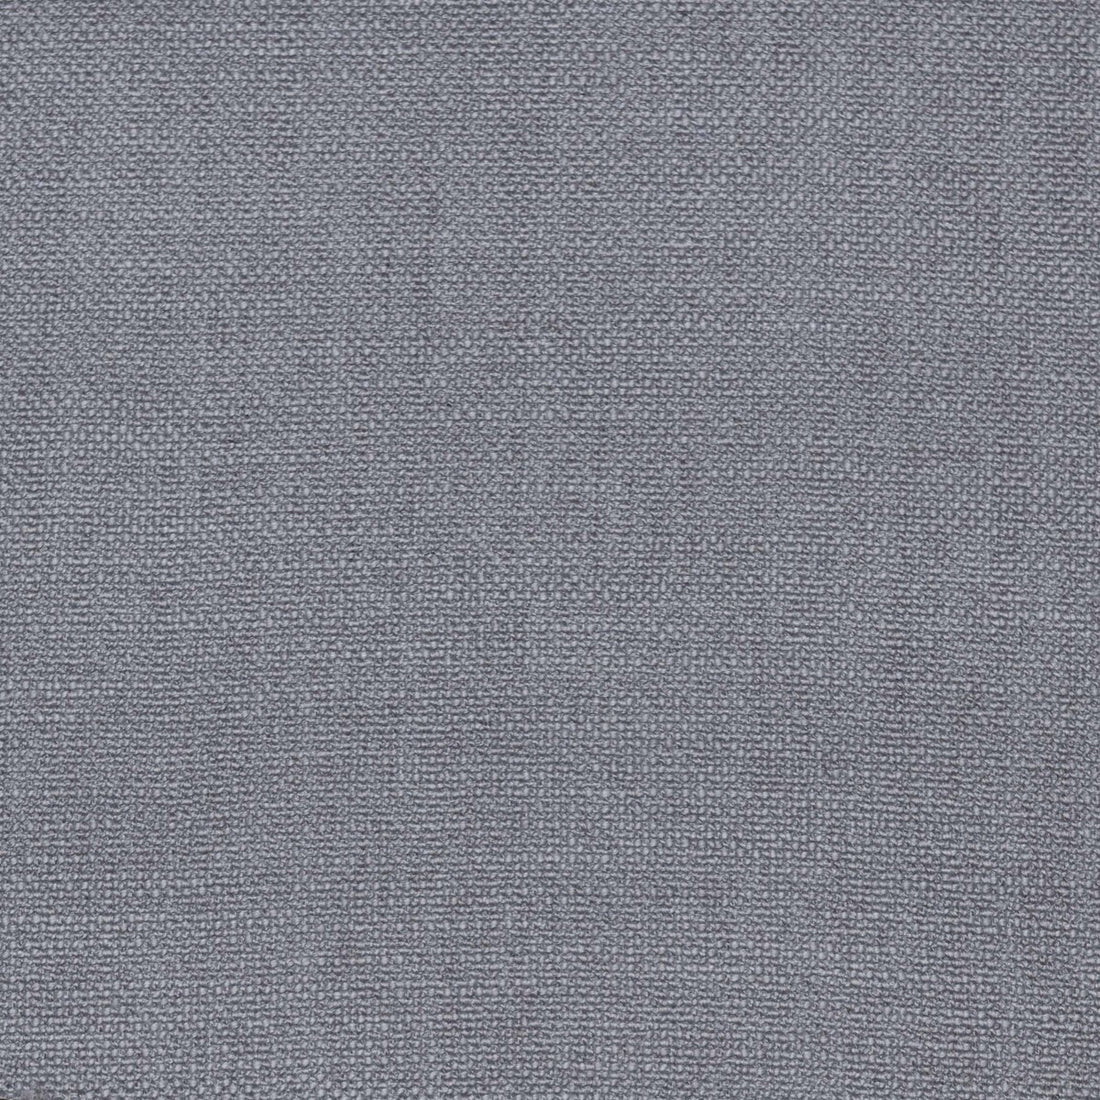 Shaba fabric in gris perla color - pattern GDT5428.5.0 - by Gaston y Daniela in the Gaston Africalia collection